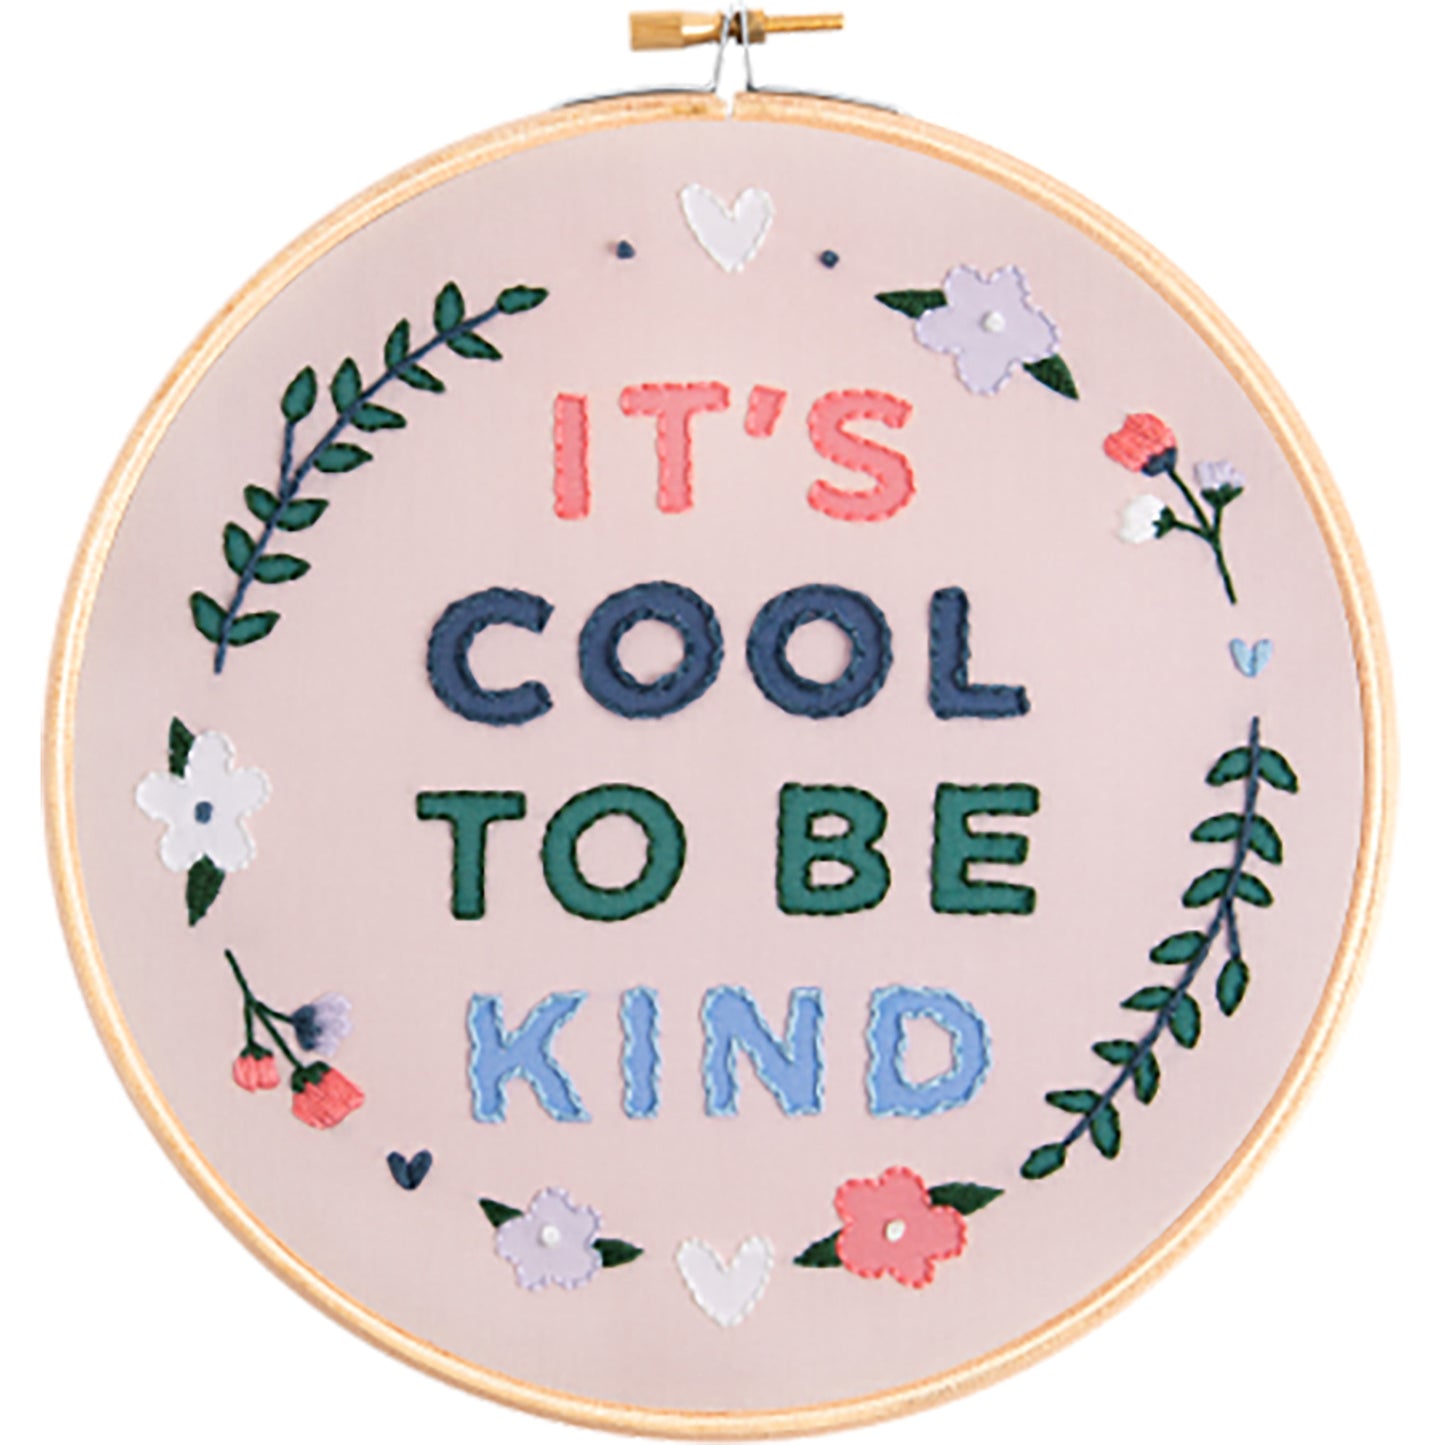 It's Cool To Be Kind Embroidery Kit Alternative View #1